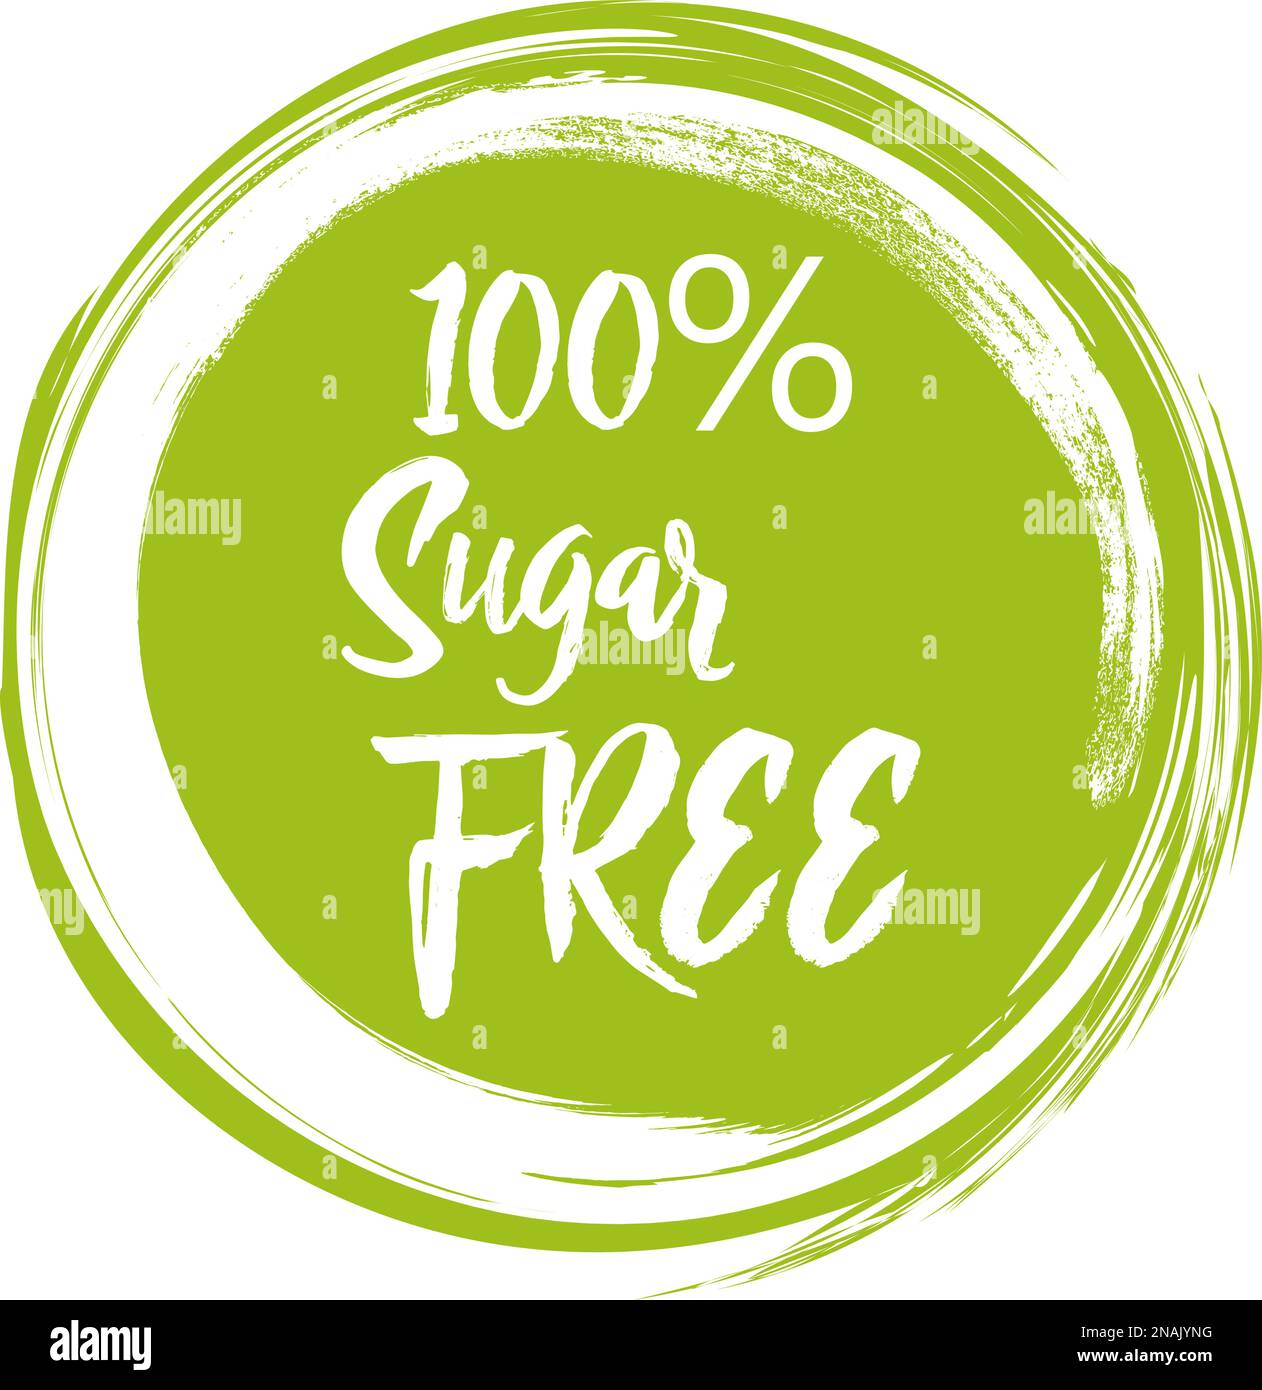 Round green label with text - Sugar free. Vector illustration. Stock Vector